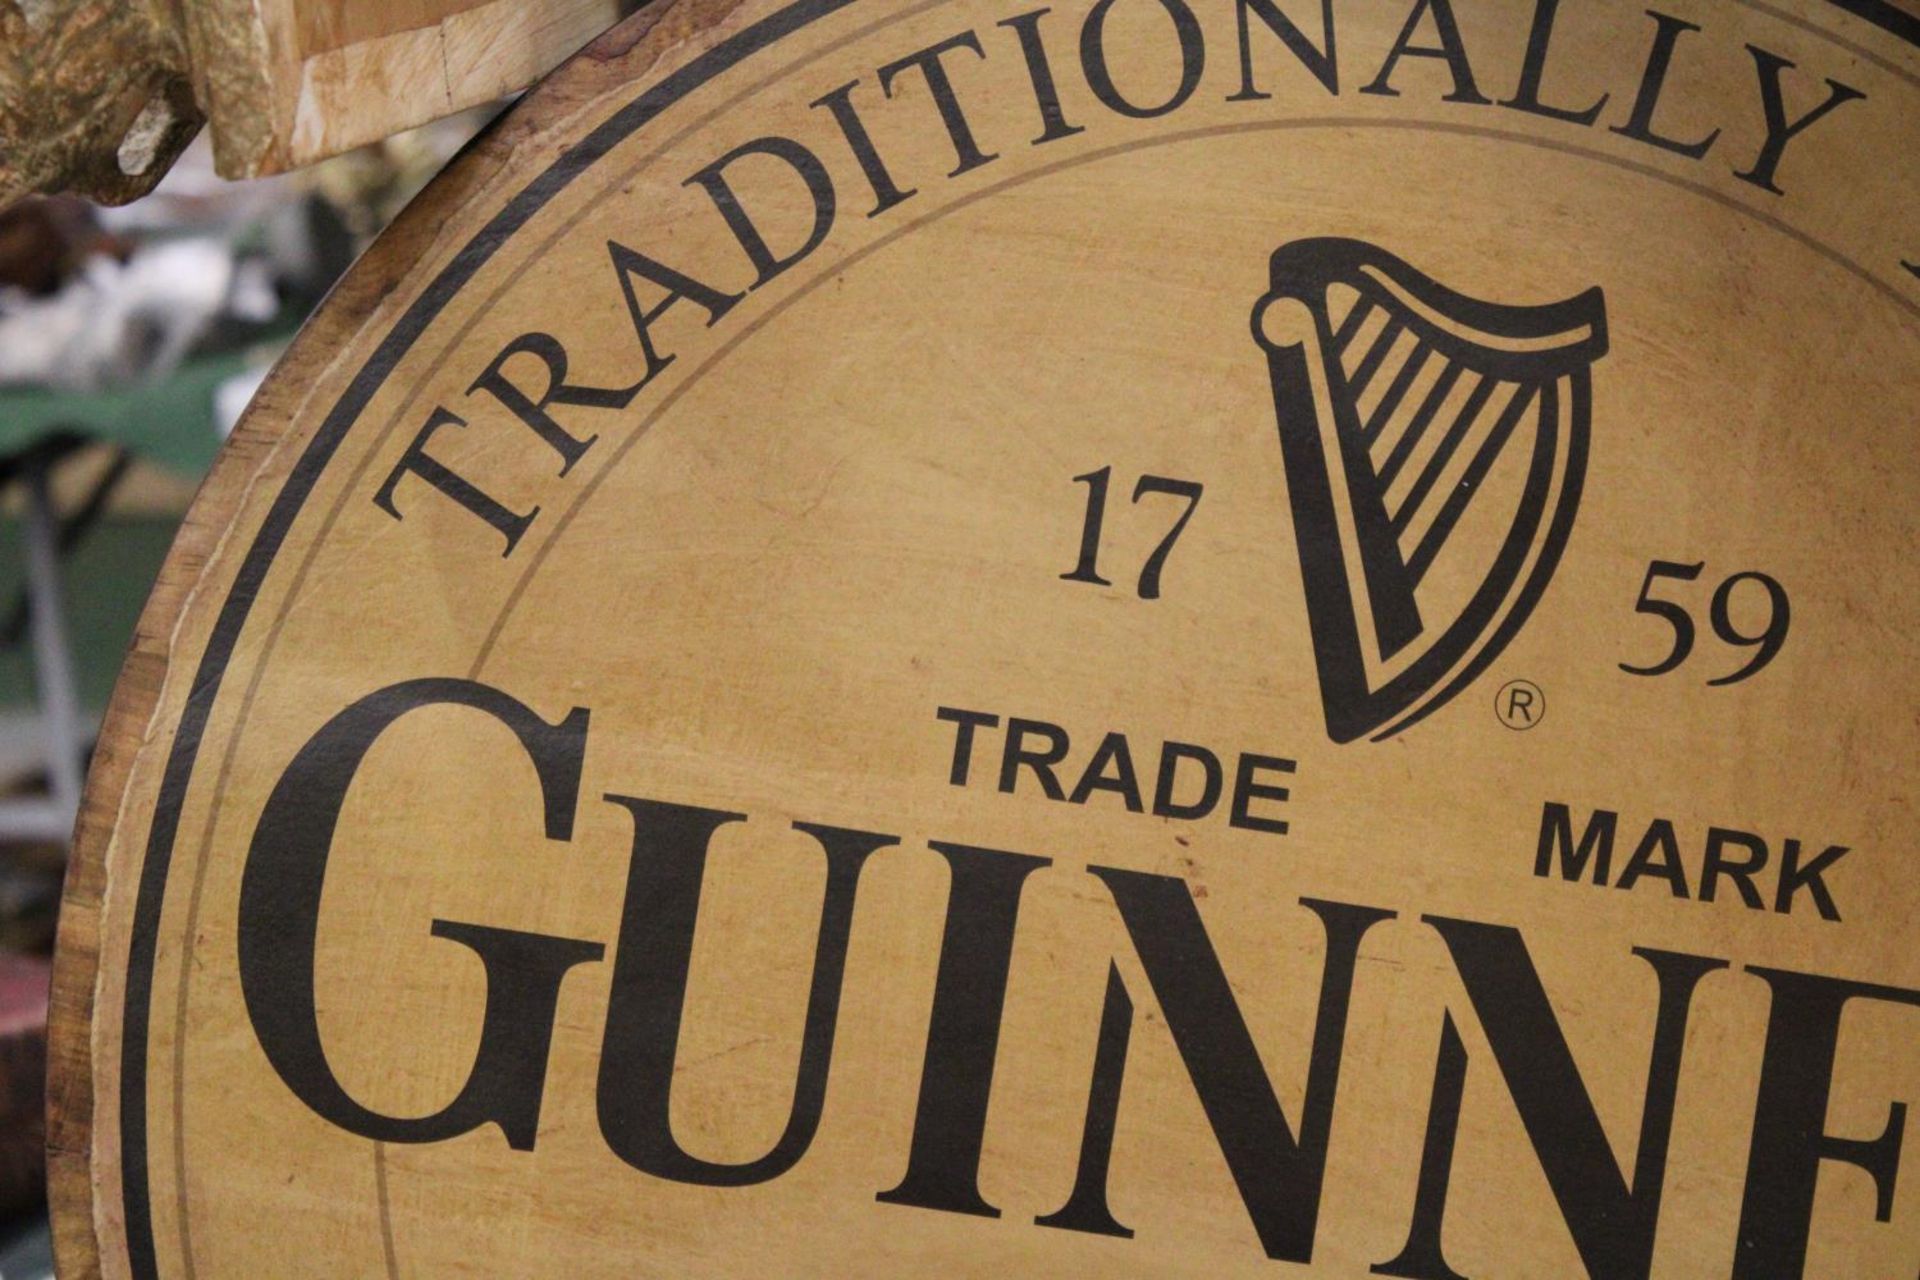 A LARGE WOODEN CIRCULAR GUINESS ADVERTISING SIGN 24" DIAMETER - Image 2 of 4